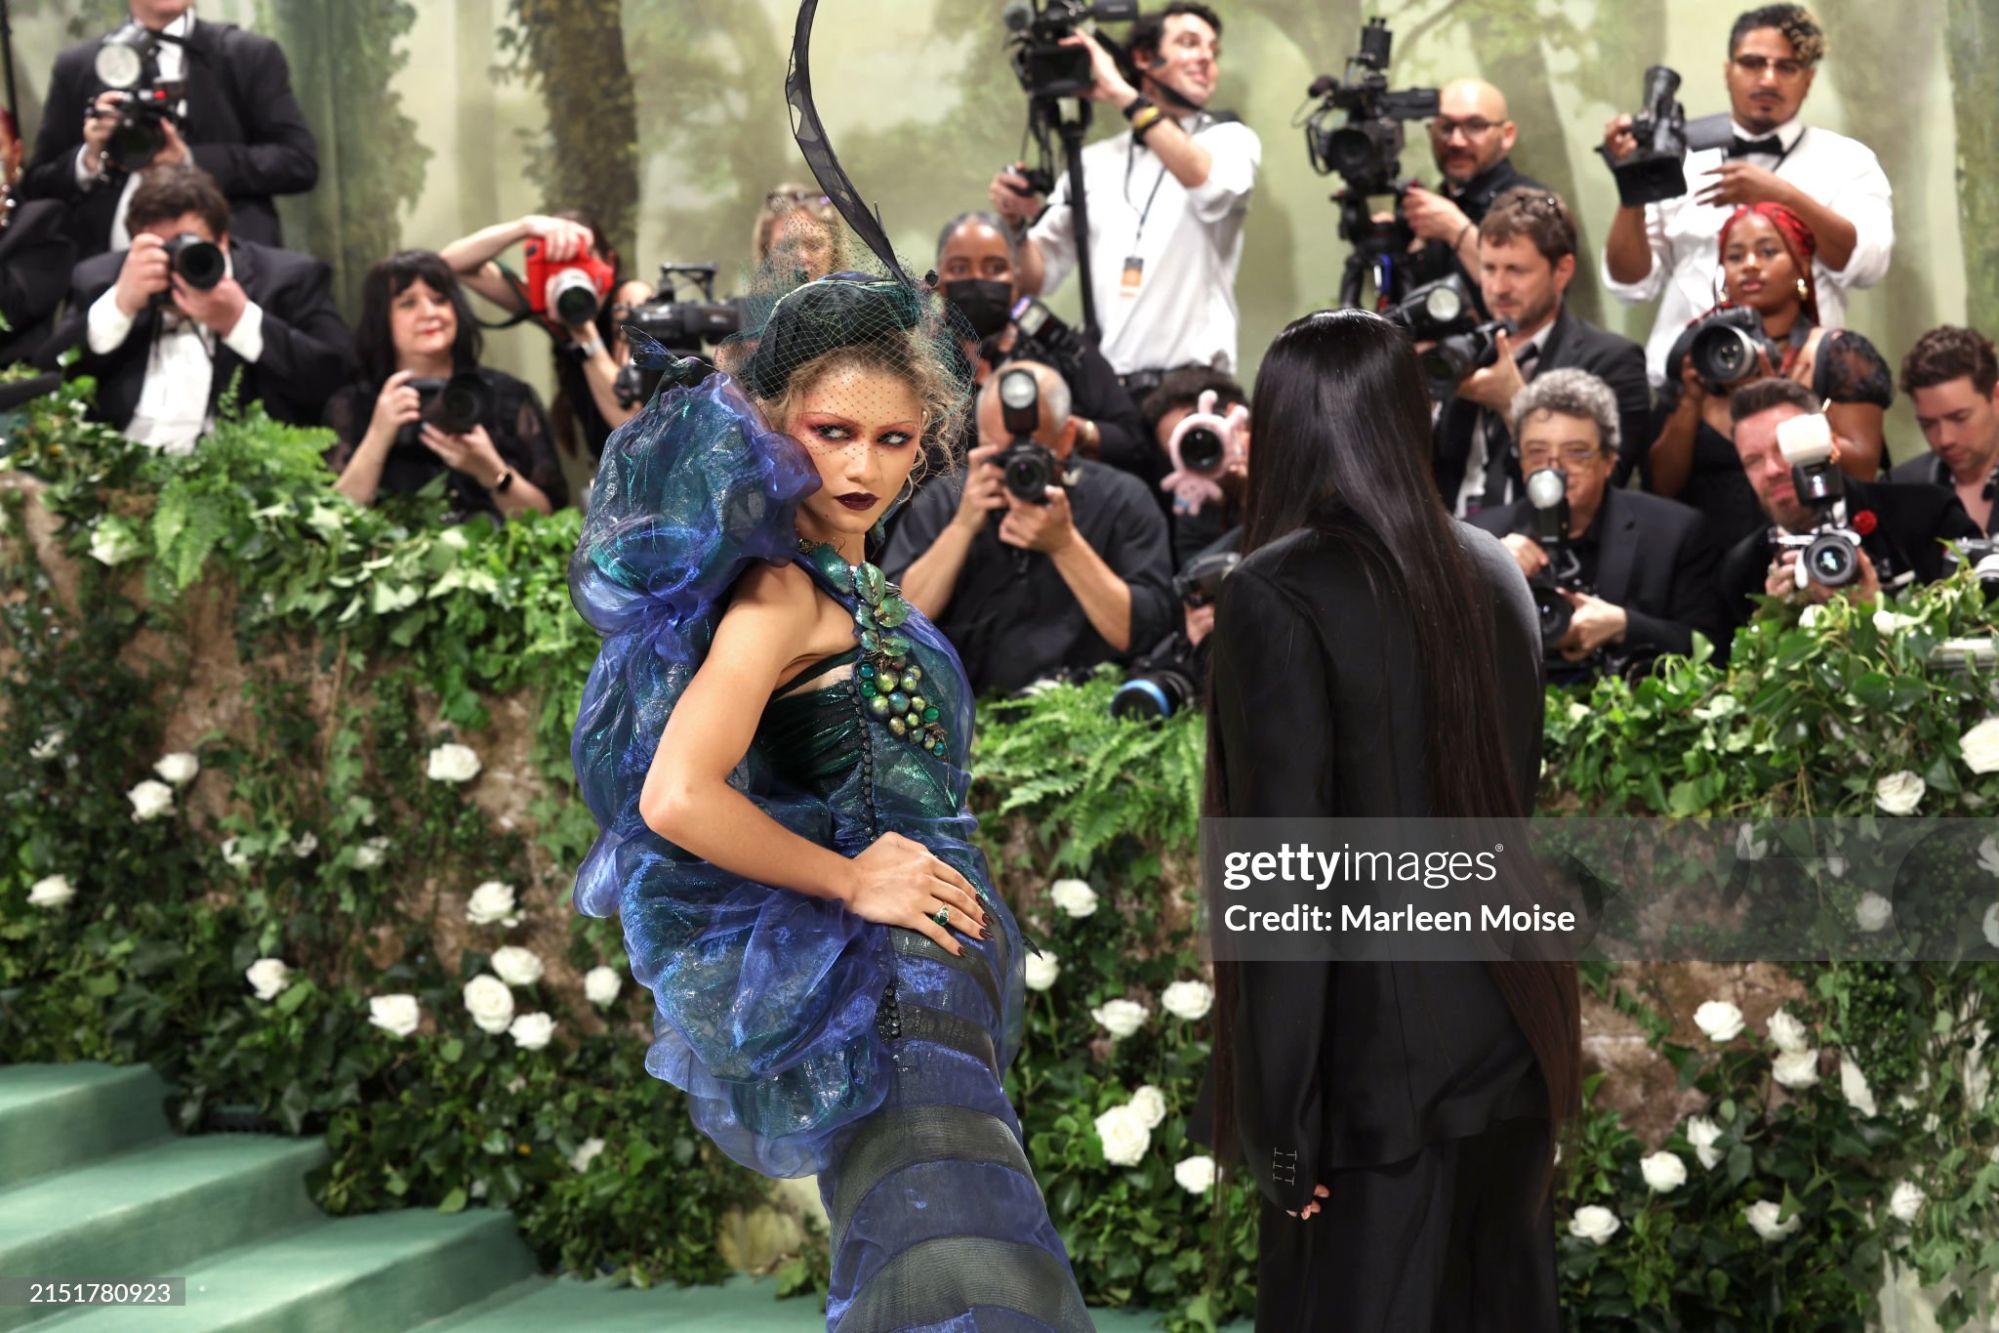 gettyimages-2151780923-2048x2048.jpg